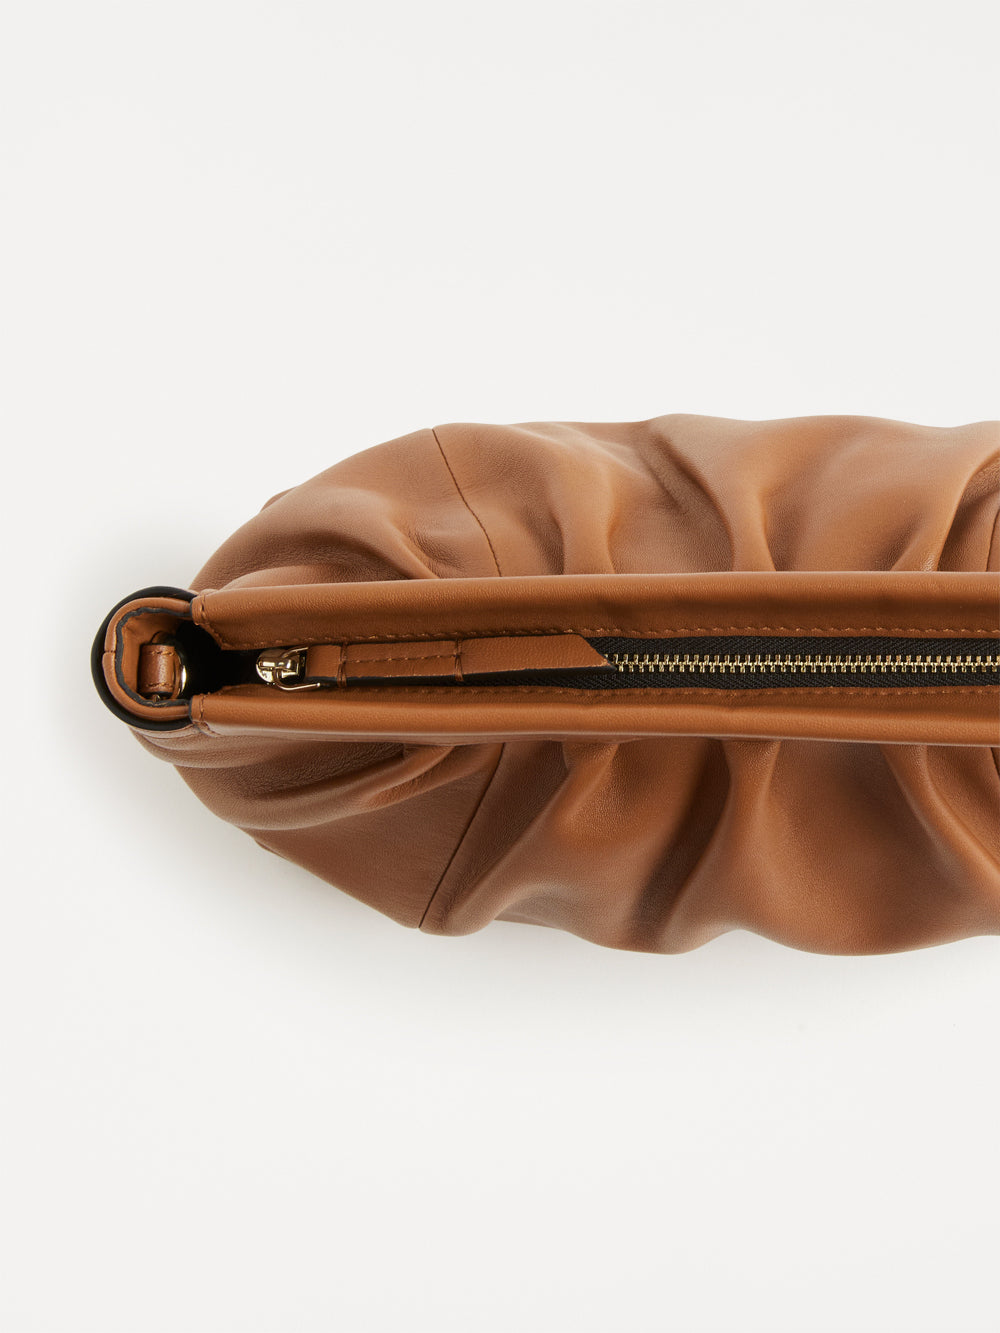 The Phillipa Leather Clutch